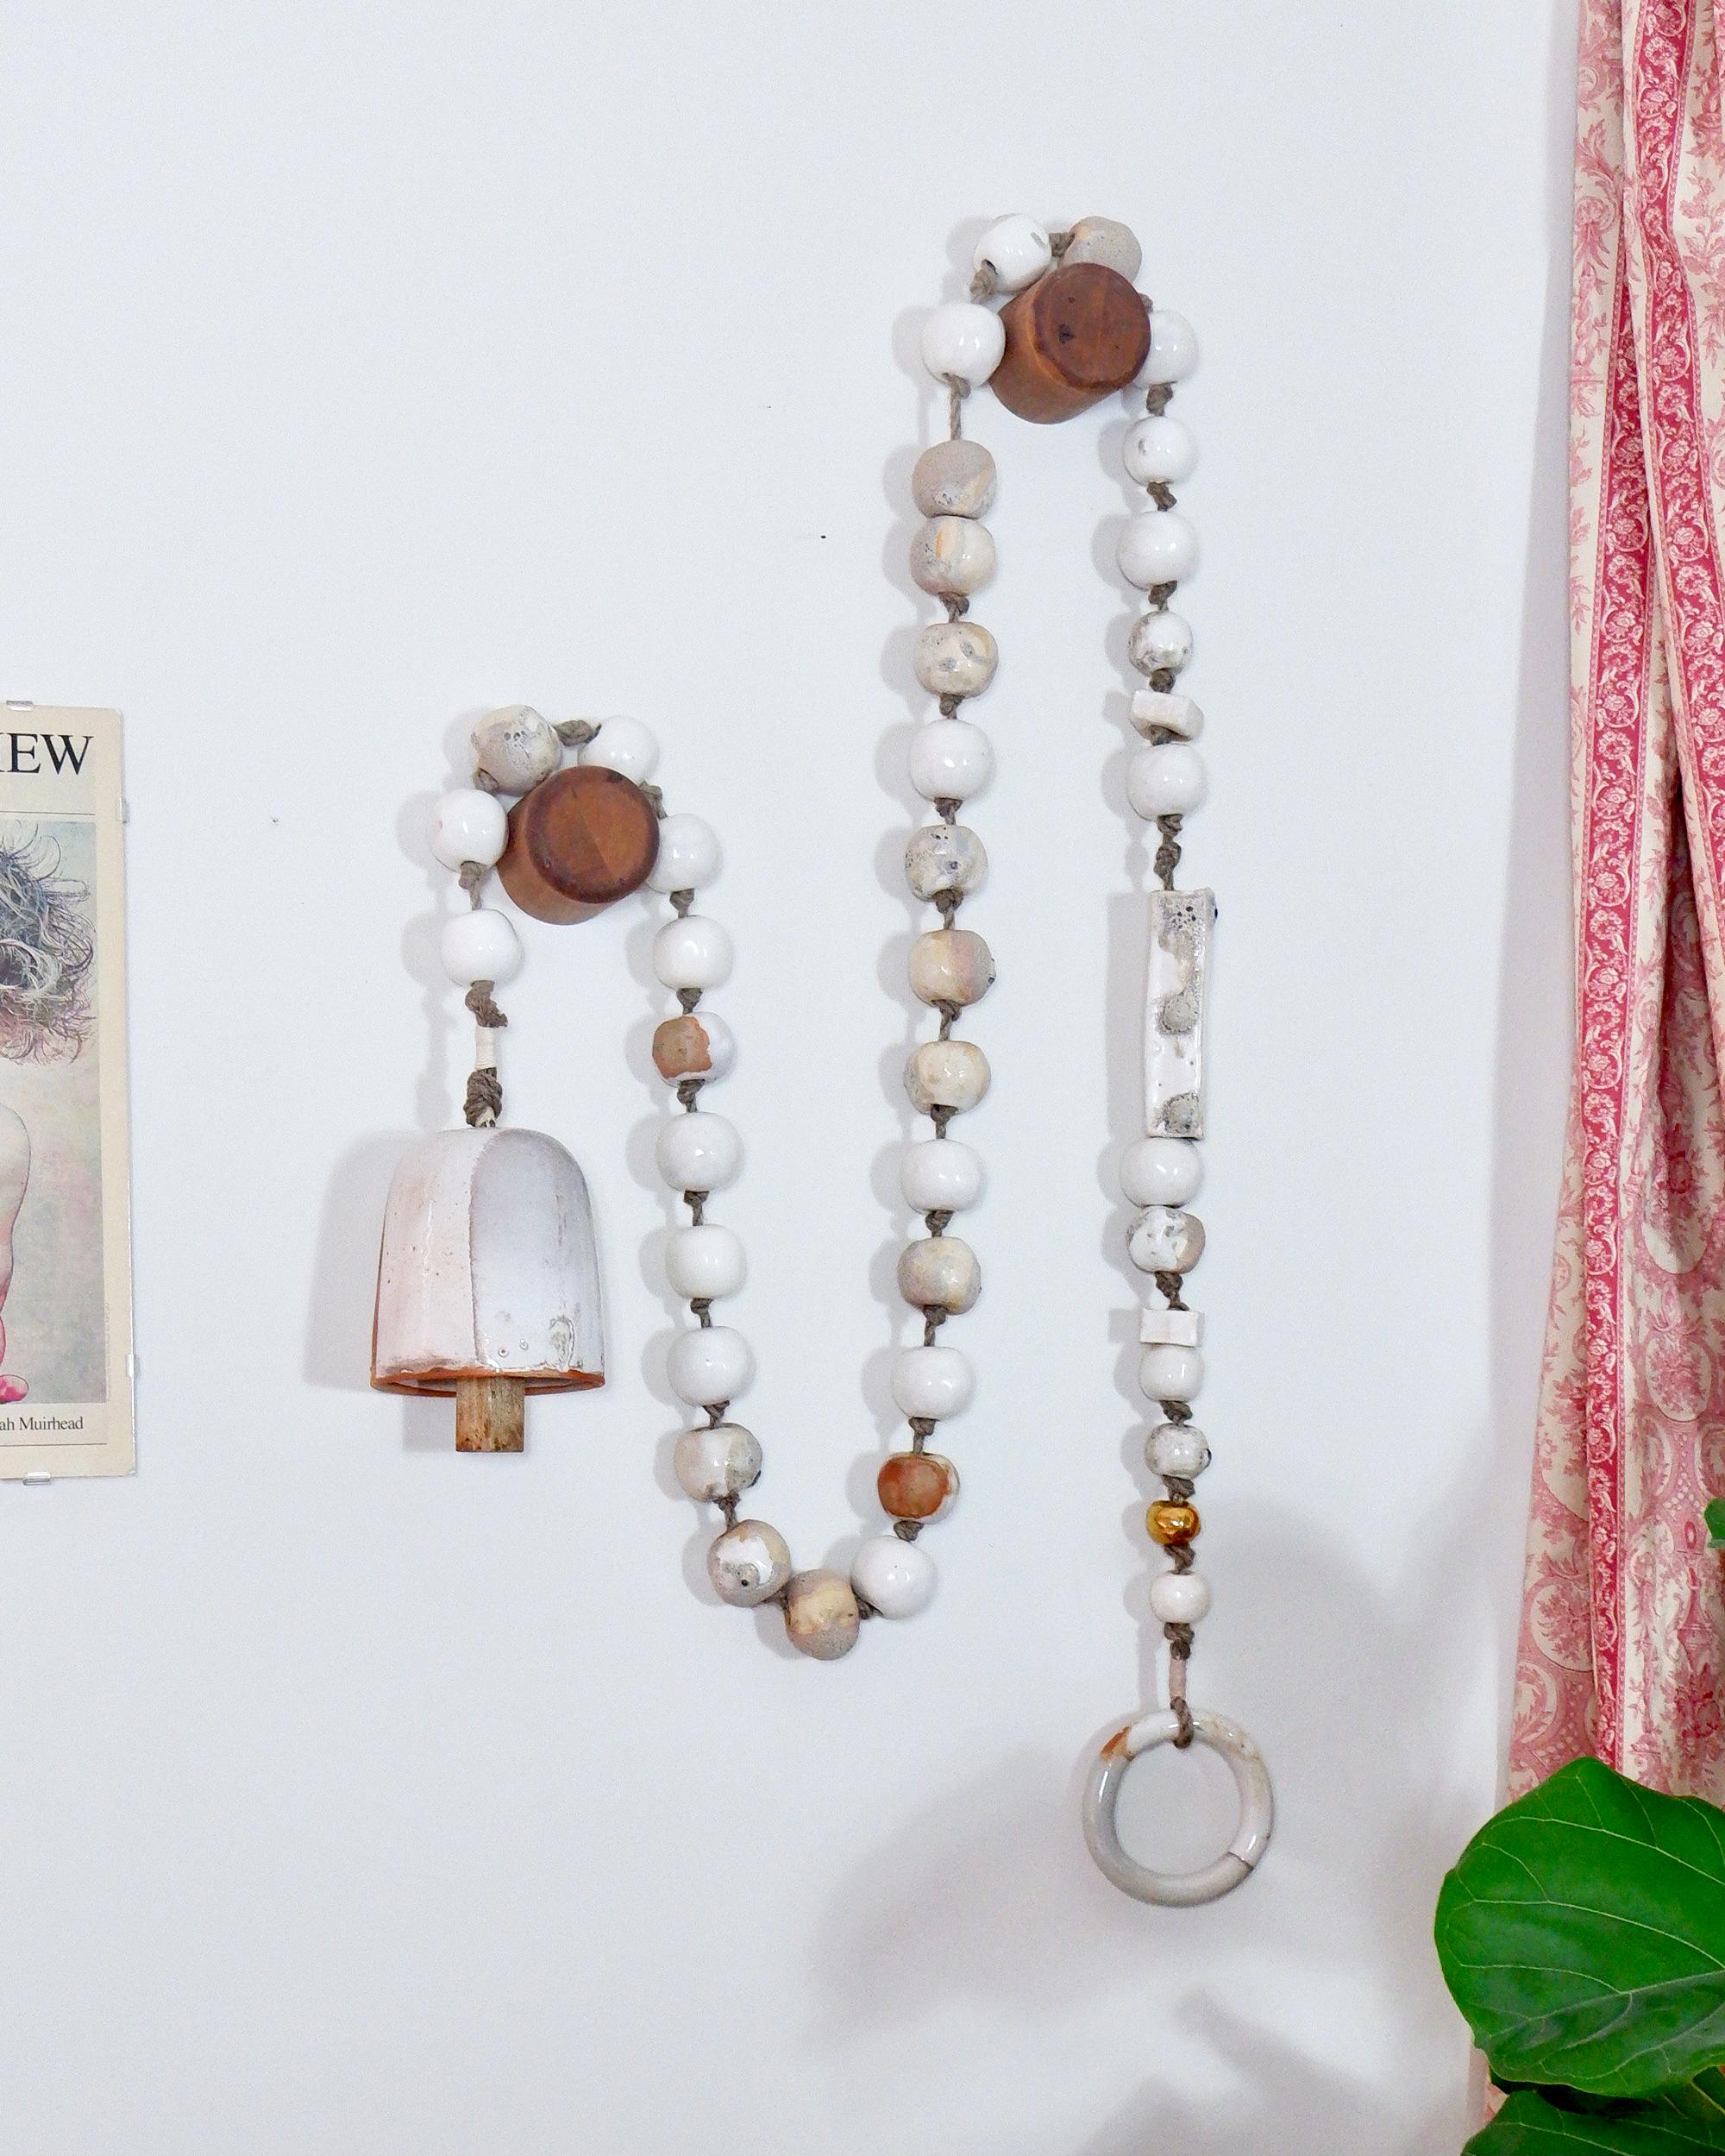 These striking hand-made beads add a bit of primitive character to your decor or personal style. The Lichen bead hanging features one-of-a-kind wood-fired beads and a bell. Drape on a wall as a garland or use as a wall hanging. Each strand comes